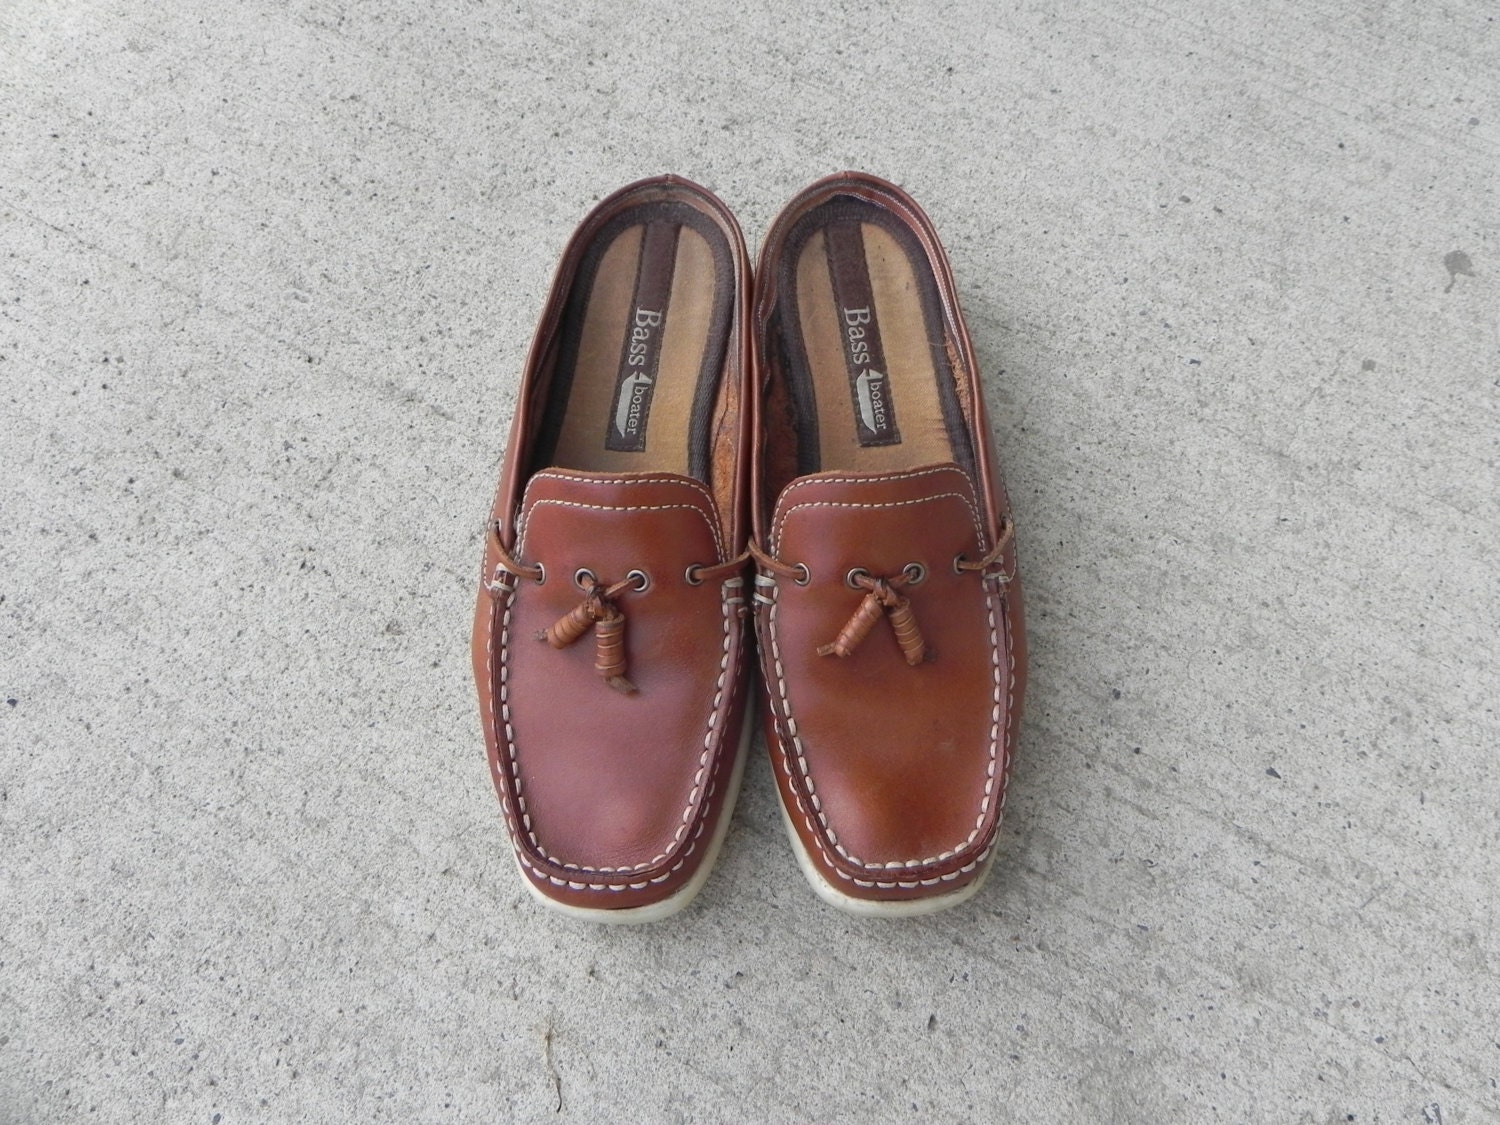 sale Vintage BASS boat shoes LEATHER BOATERS docksiders